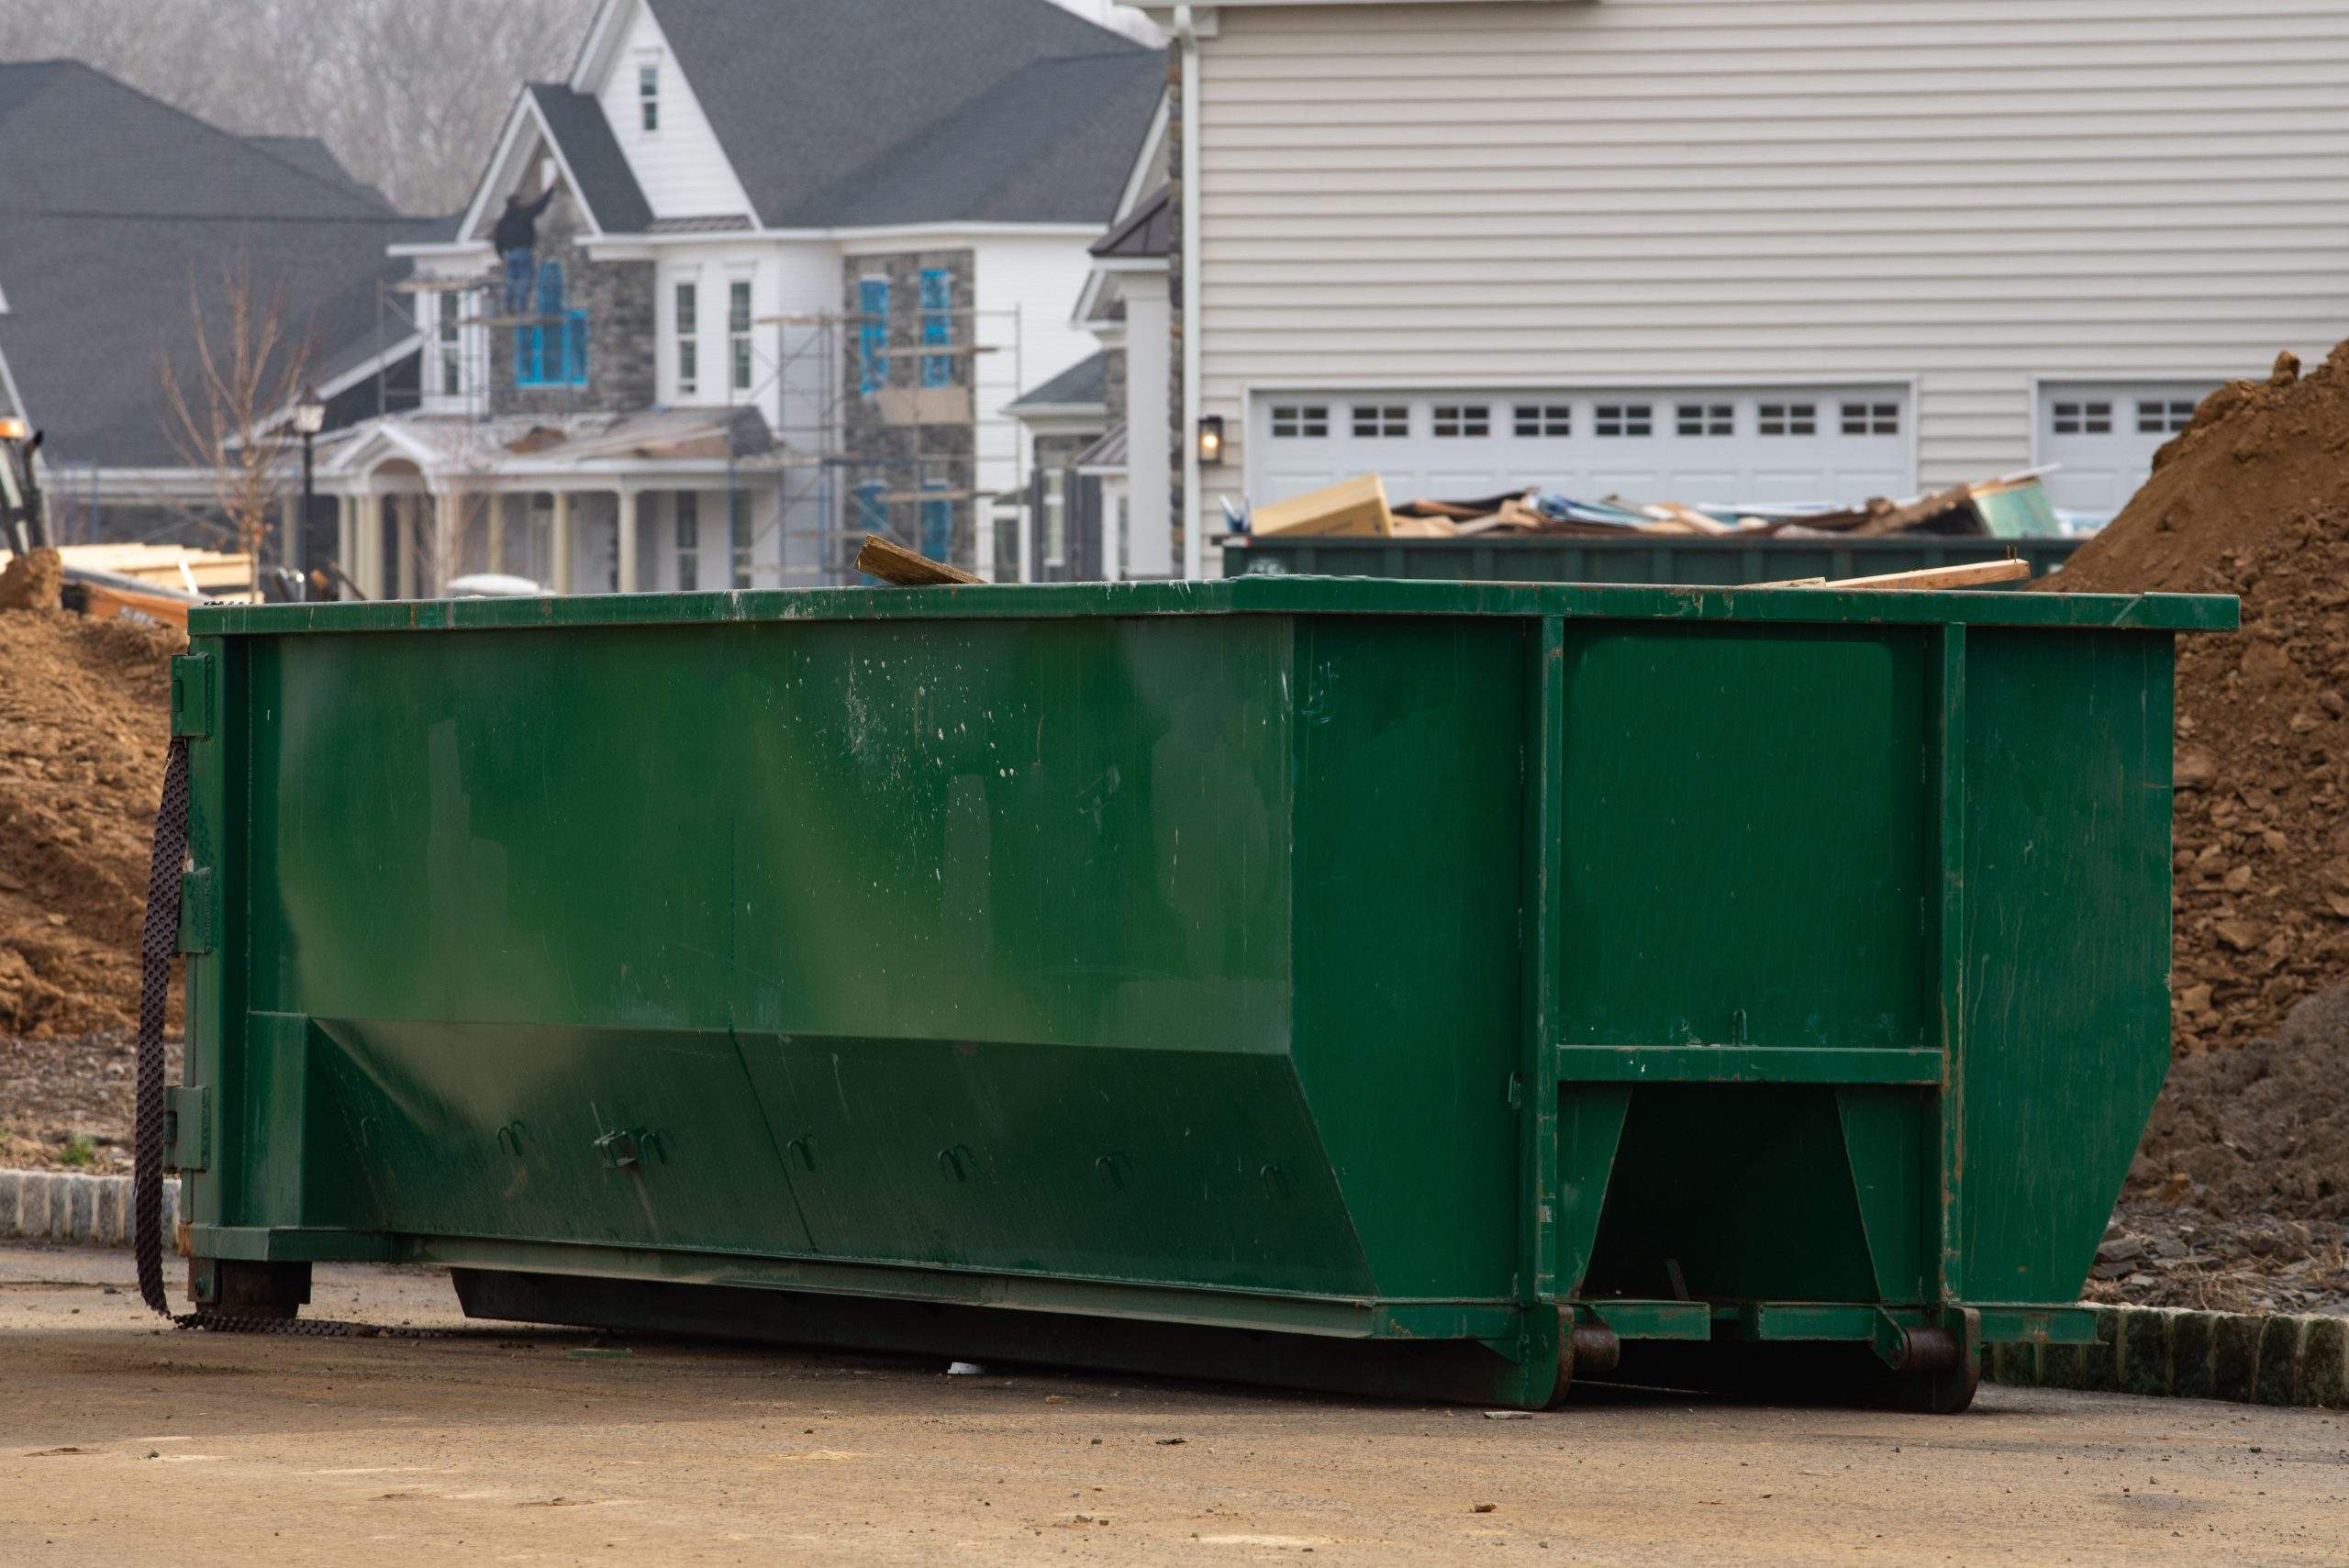 construction waste in a large green roro